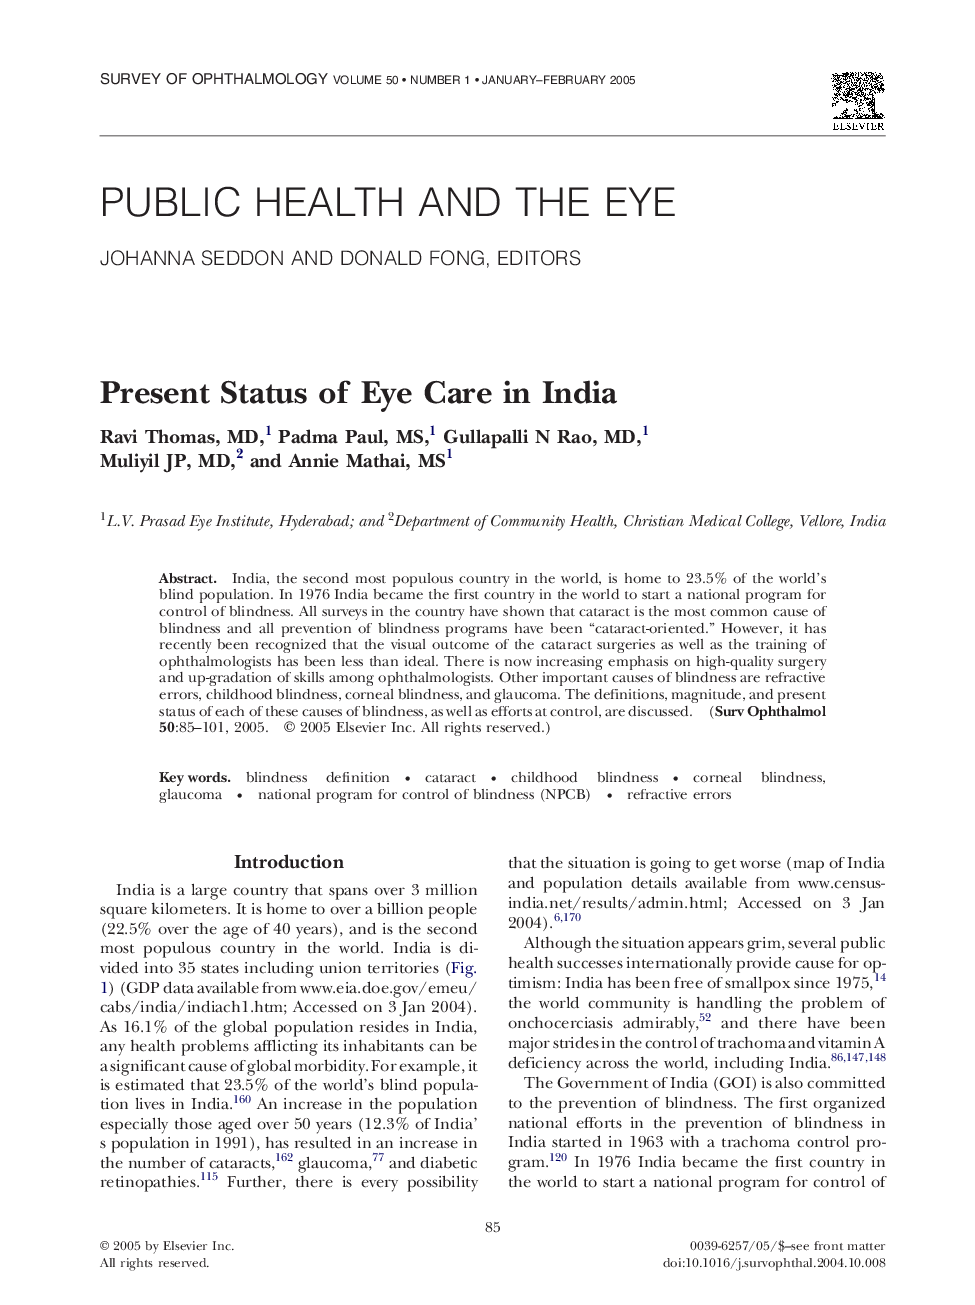 Present status of eye care in India